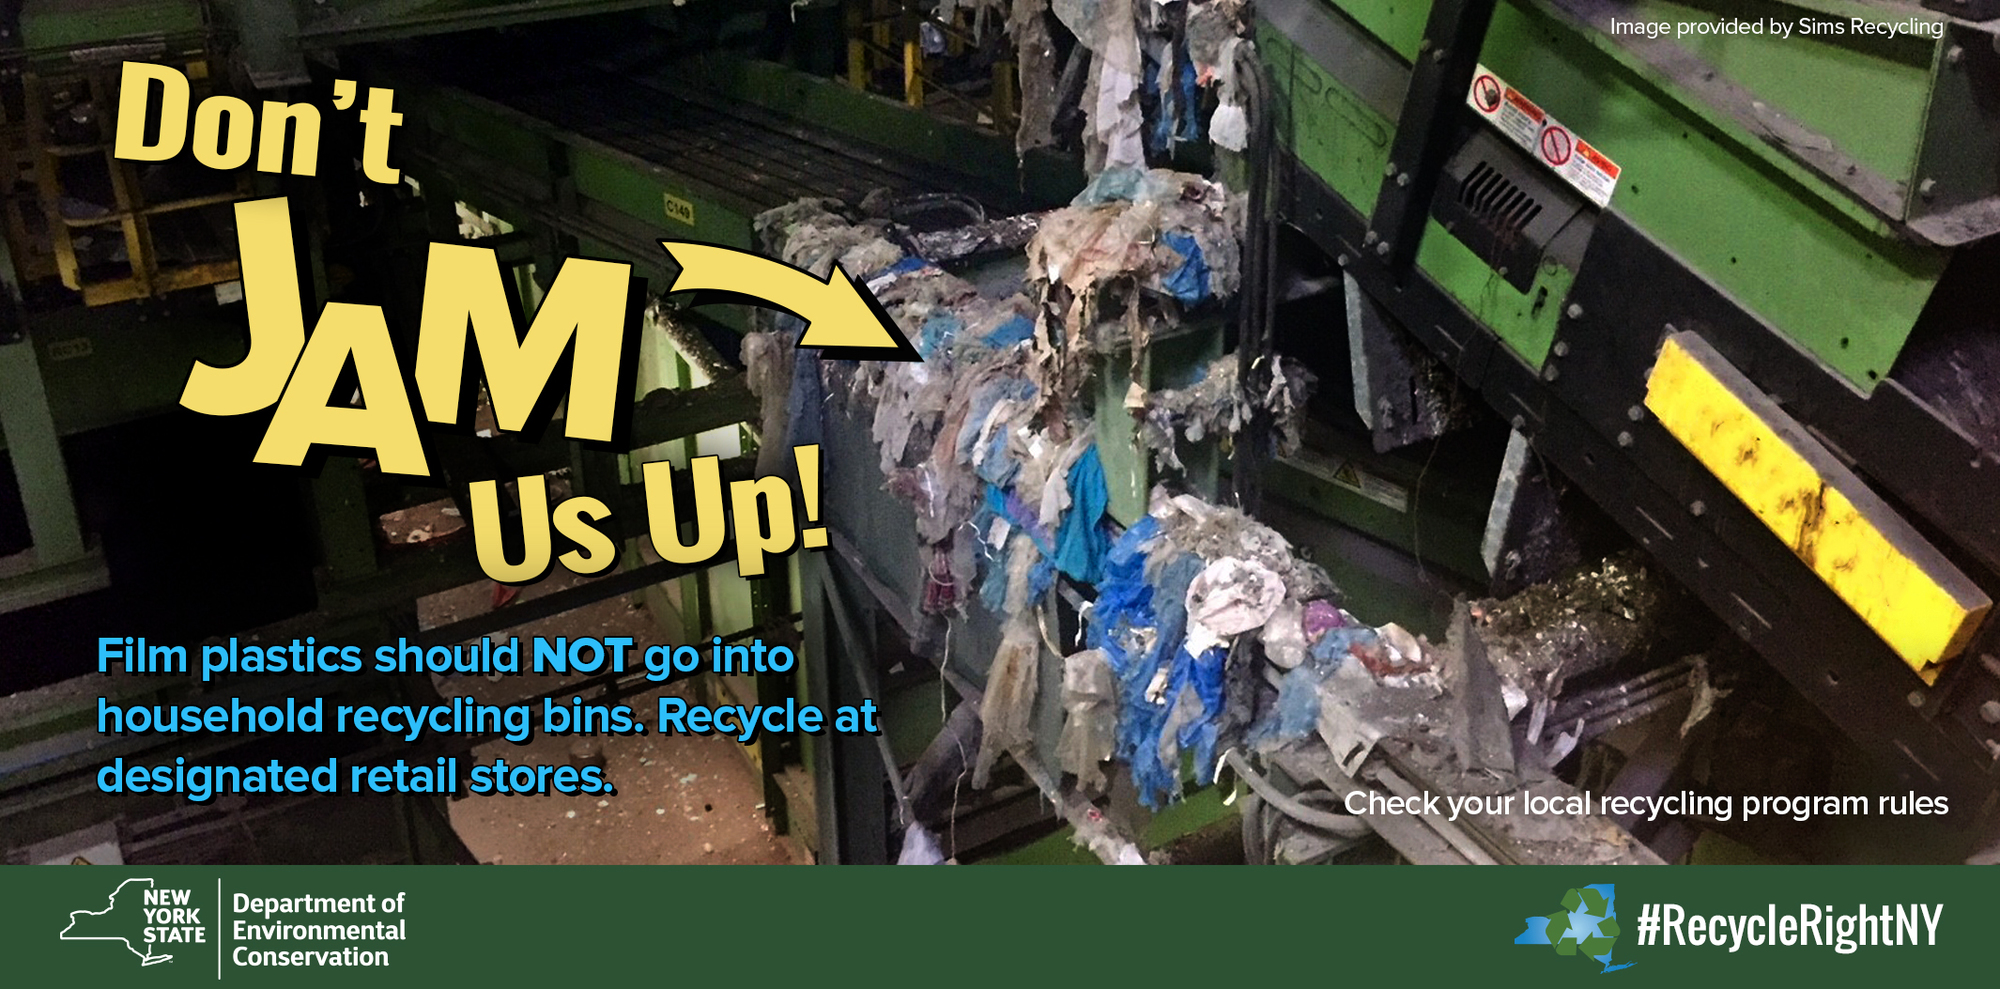 image showing film plastic jamming recycling facility equipment with text that says 